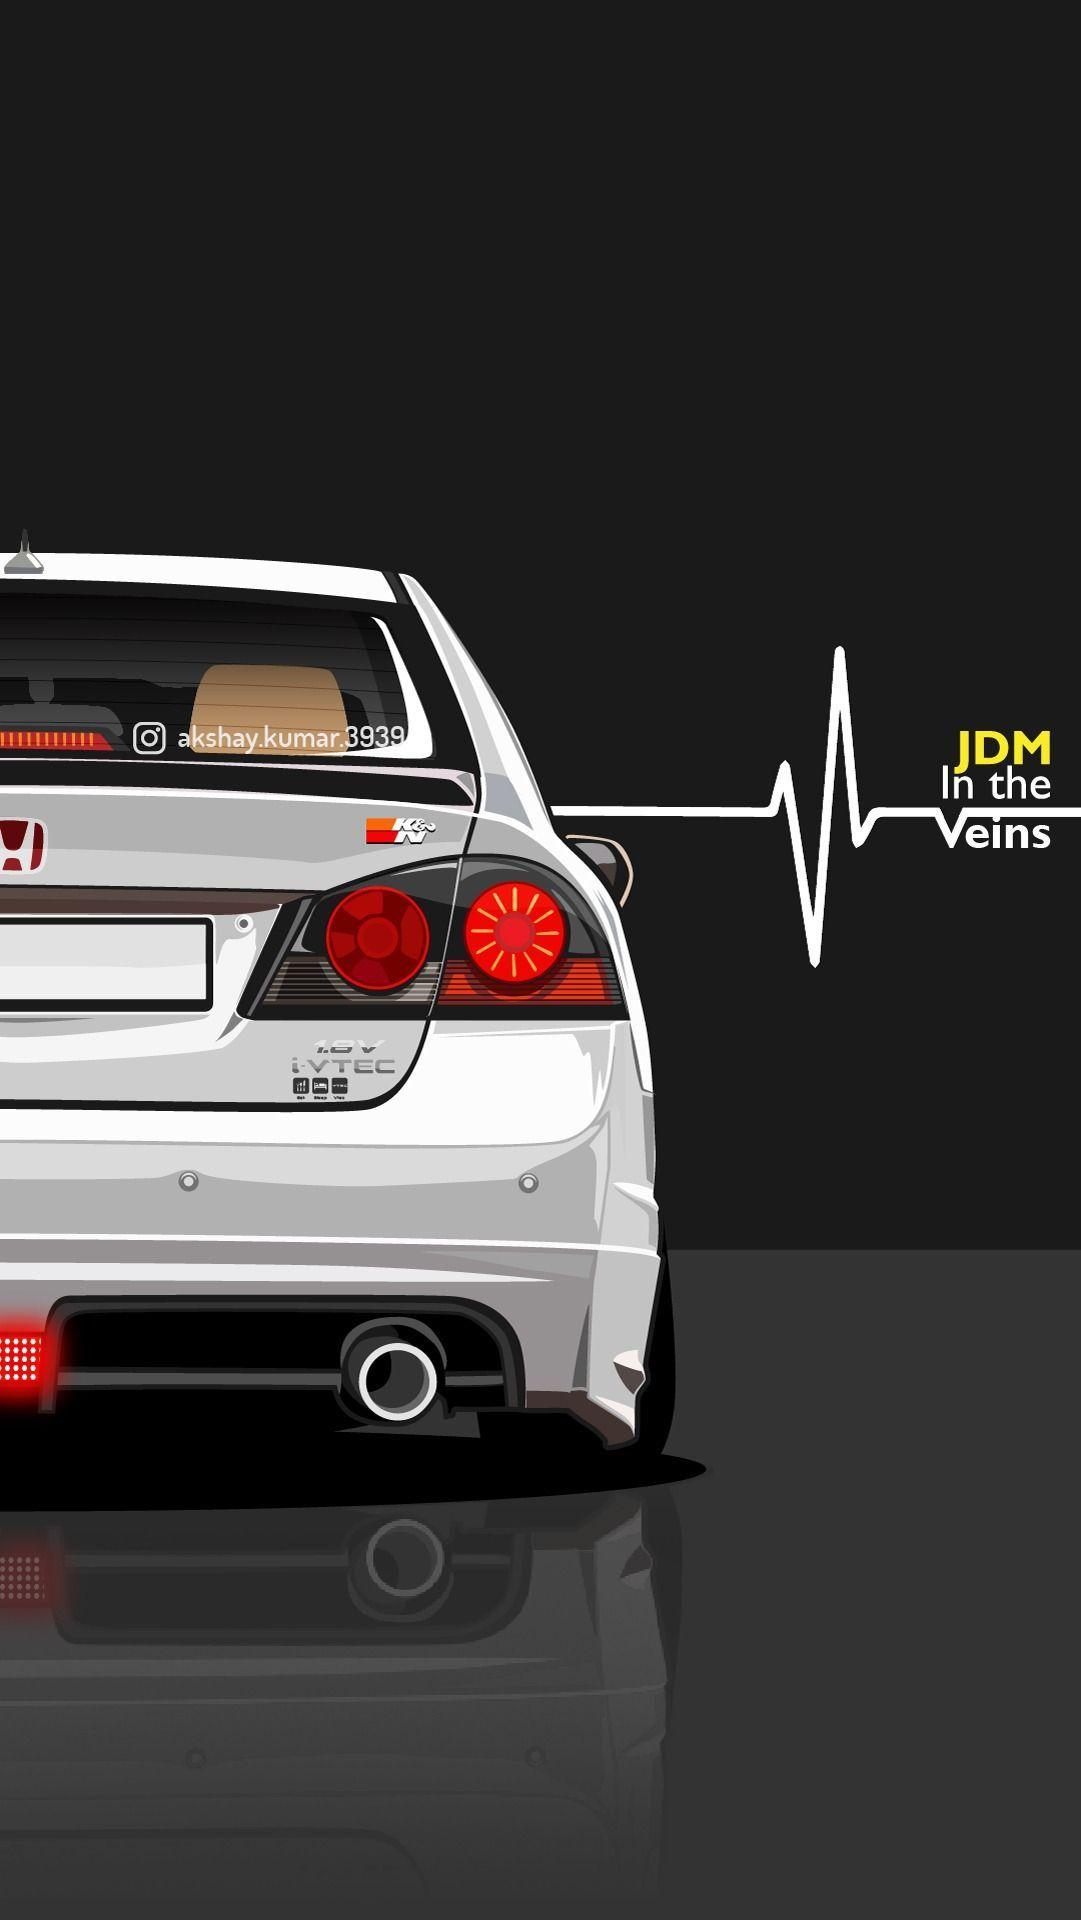 jdm domo by michaelludwig on DeviantArt